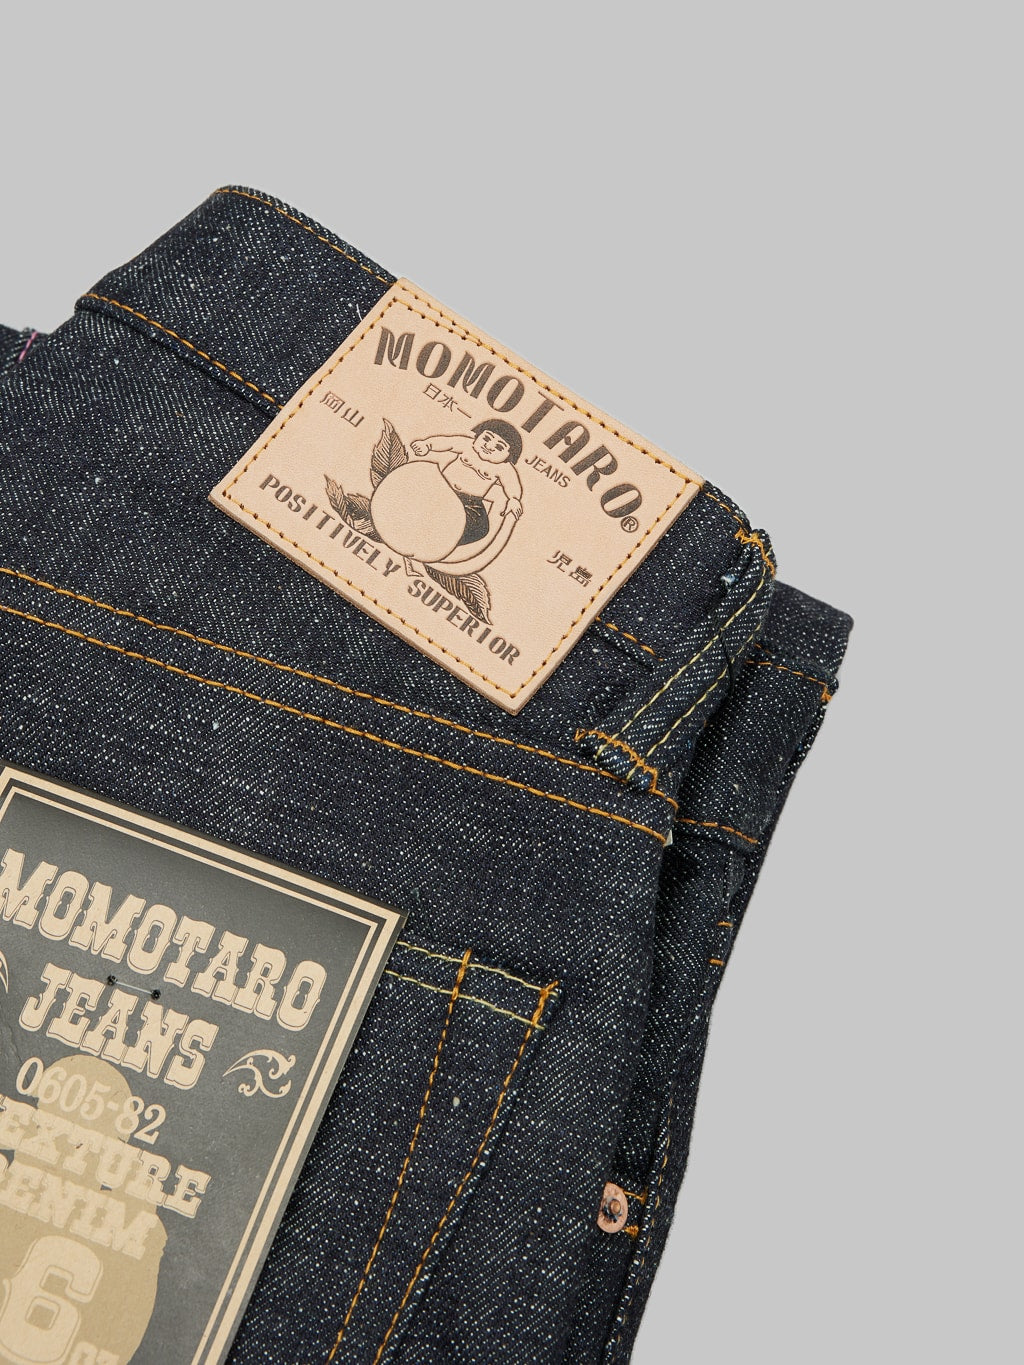 momotaro jeans 0605 82 16oz texture denim natural tapered leather patch